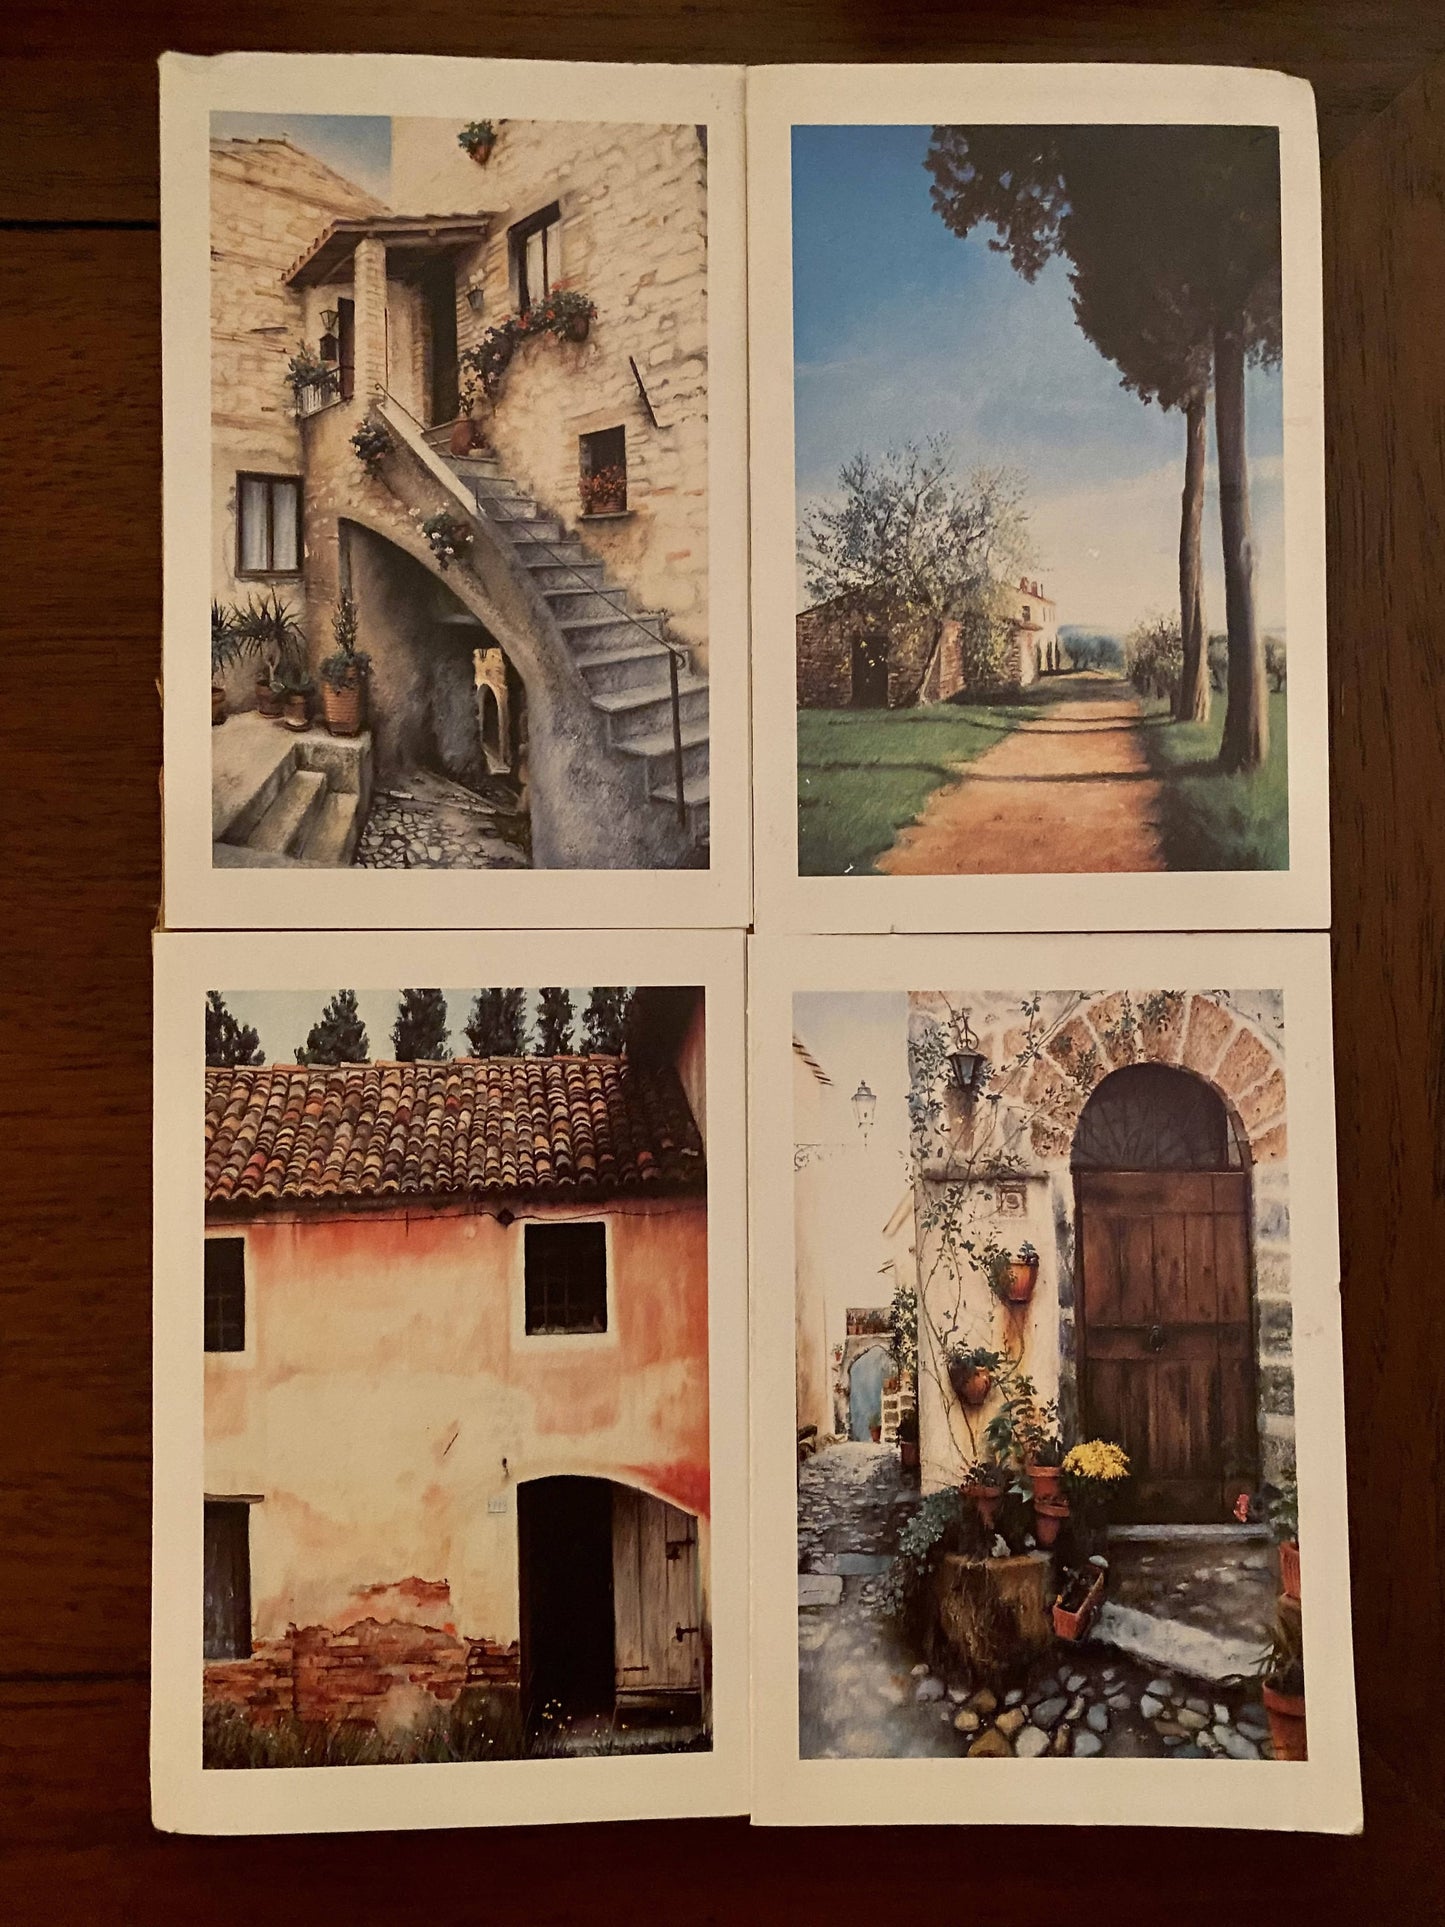 Views of Italy - Countryside - notecard set